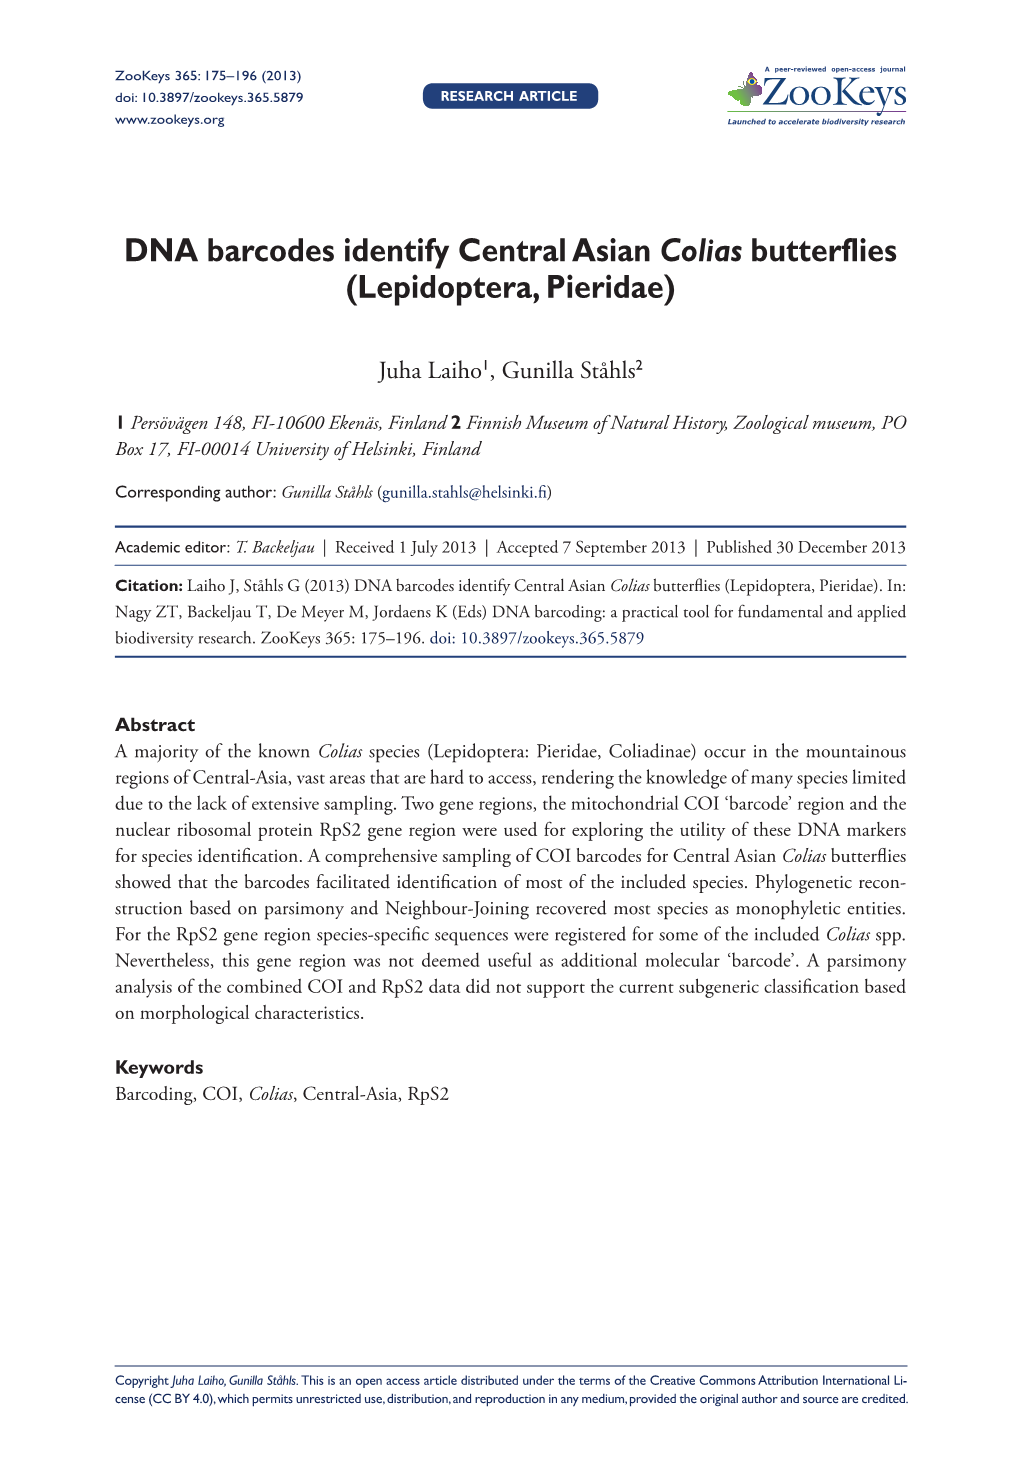 DNA Barcodes Identify Central-Asian Colias Butterflies (Lepidoptera